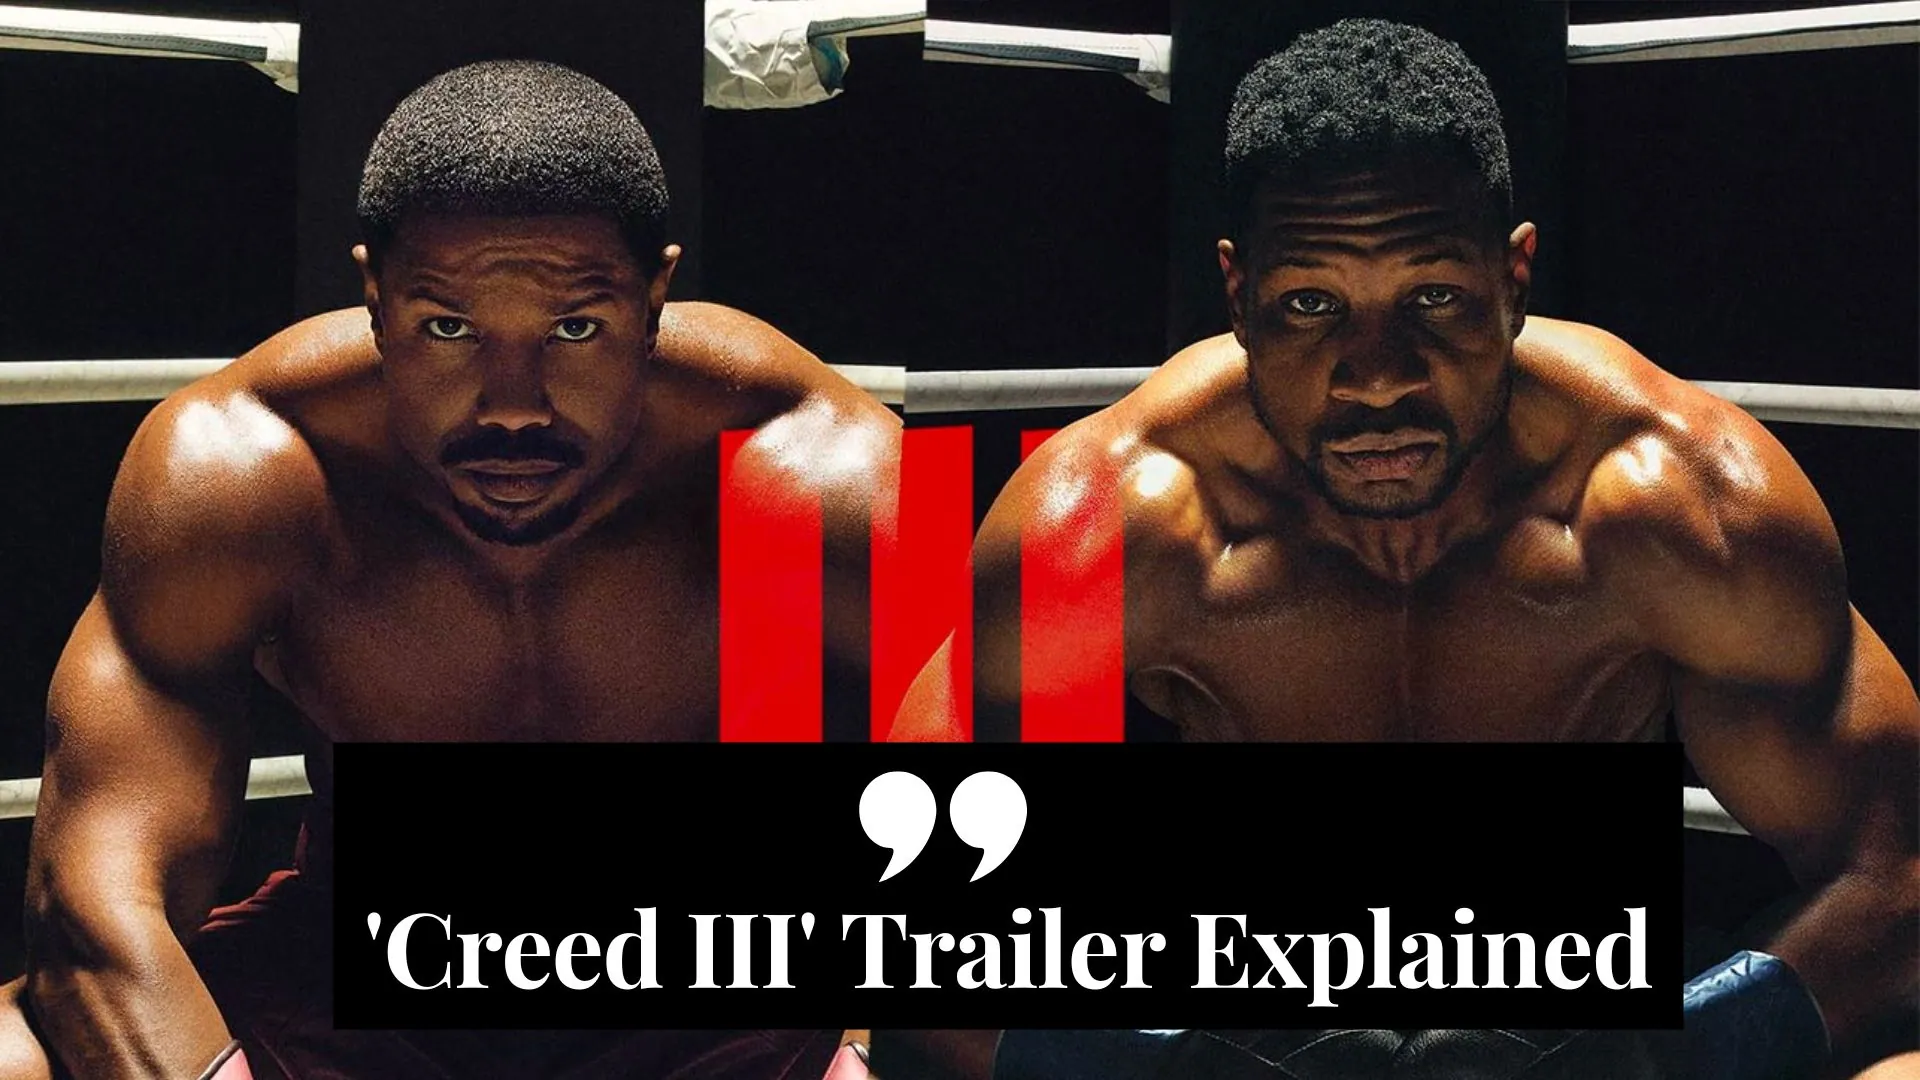 'Creed III' Trailer Explained (Image credit: flickonclick)